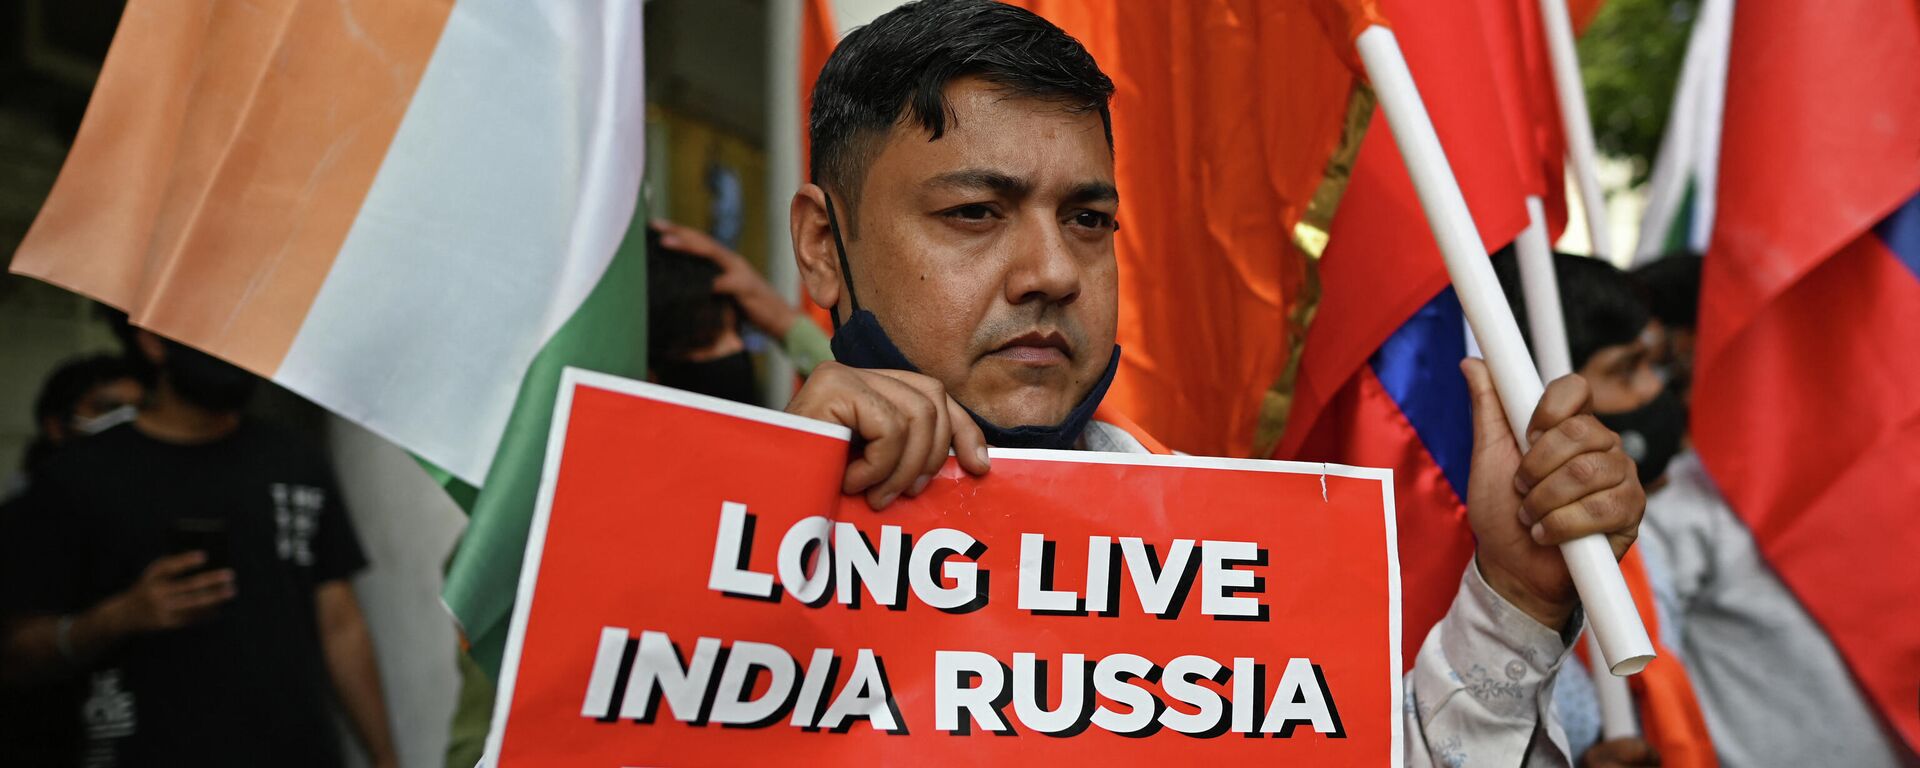 A supporter of Hindu Sena, a right-wing Hindu group, holds a placard as he takes part in a march in support of Russia during the ongoing Russia-West tensions on Ukraine, in New Delhi on March 6, 2022. - Sputnik International, 1920, 31.03.2022